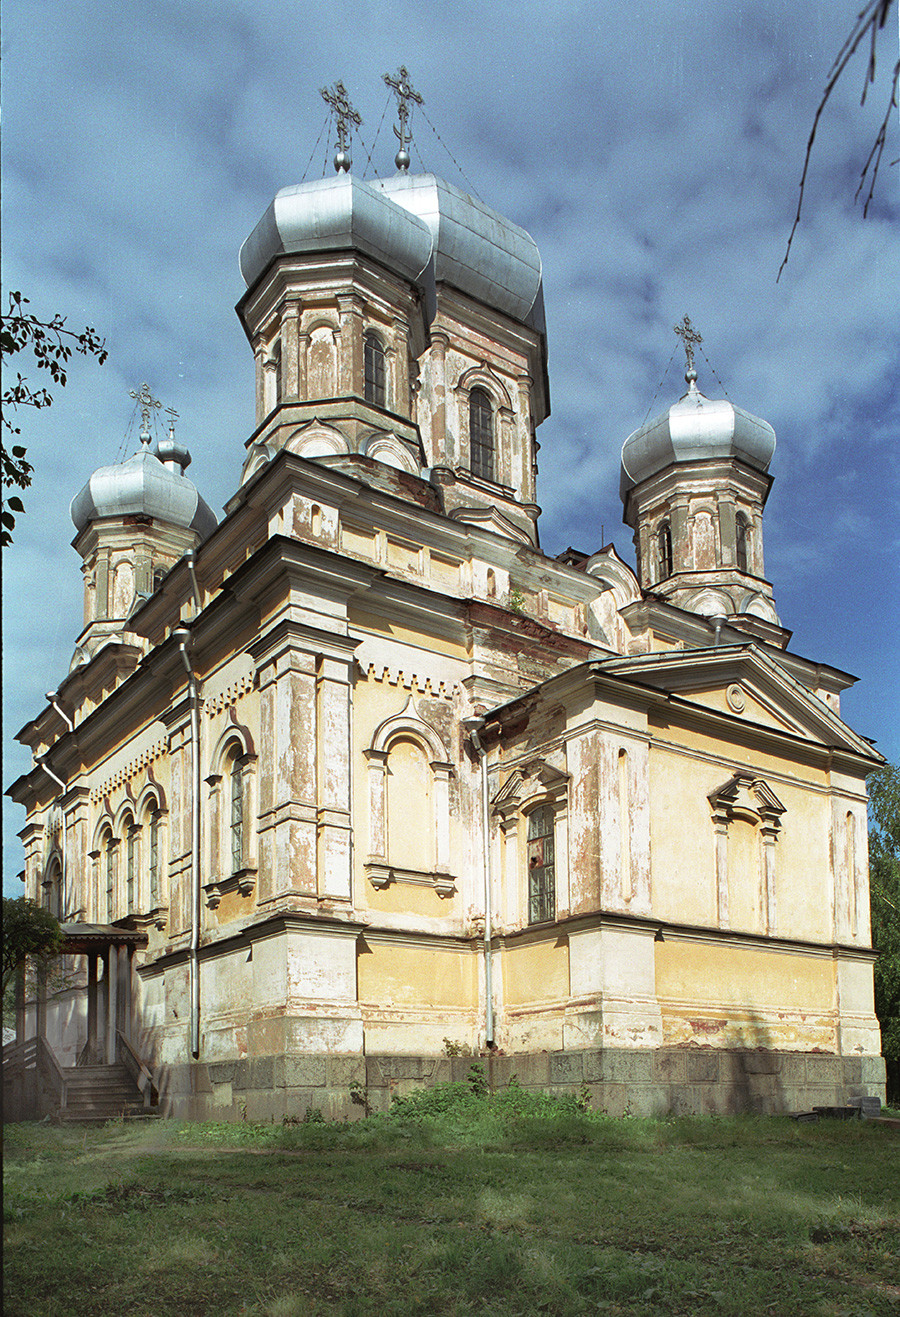 Church of the Purification (1869-1873), southeast view. August 28, 2006